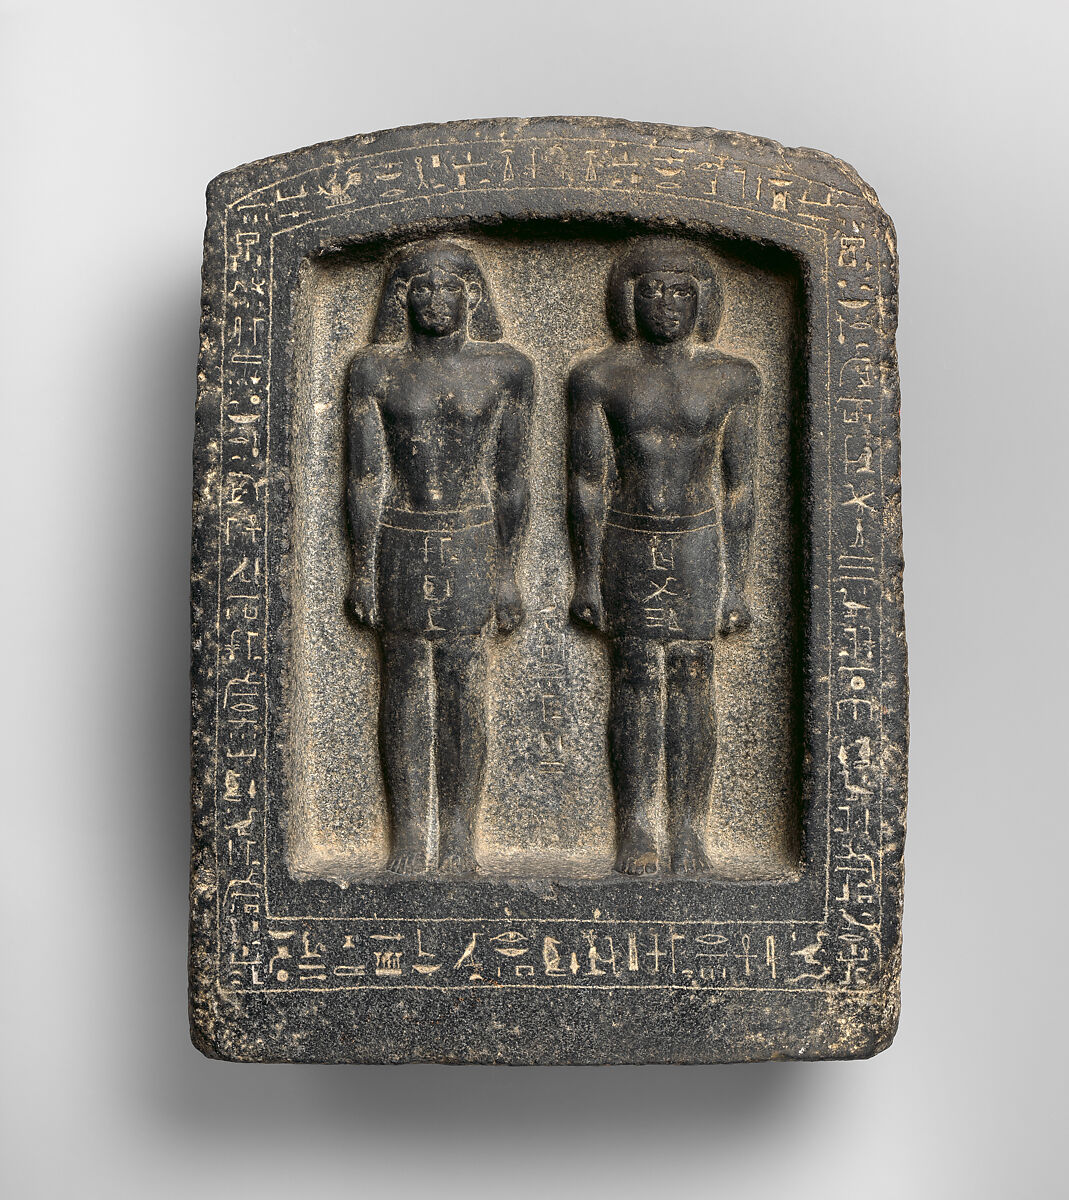 Naos stela with Pa-inmu and his father It, son of Pedise, Basalt